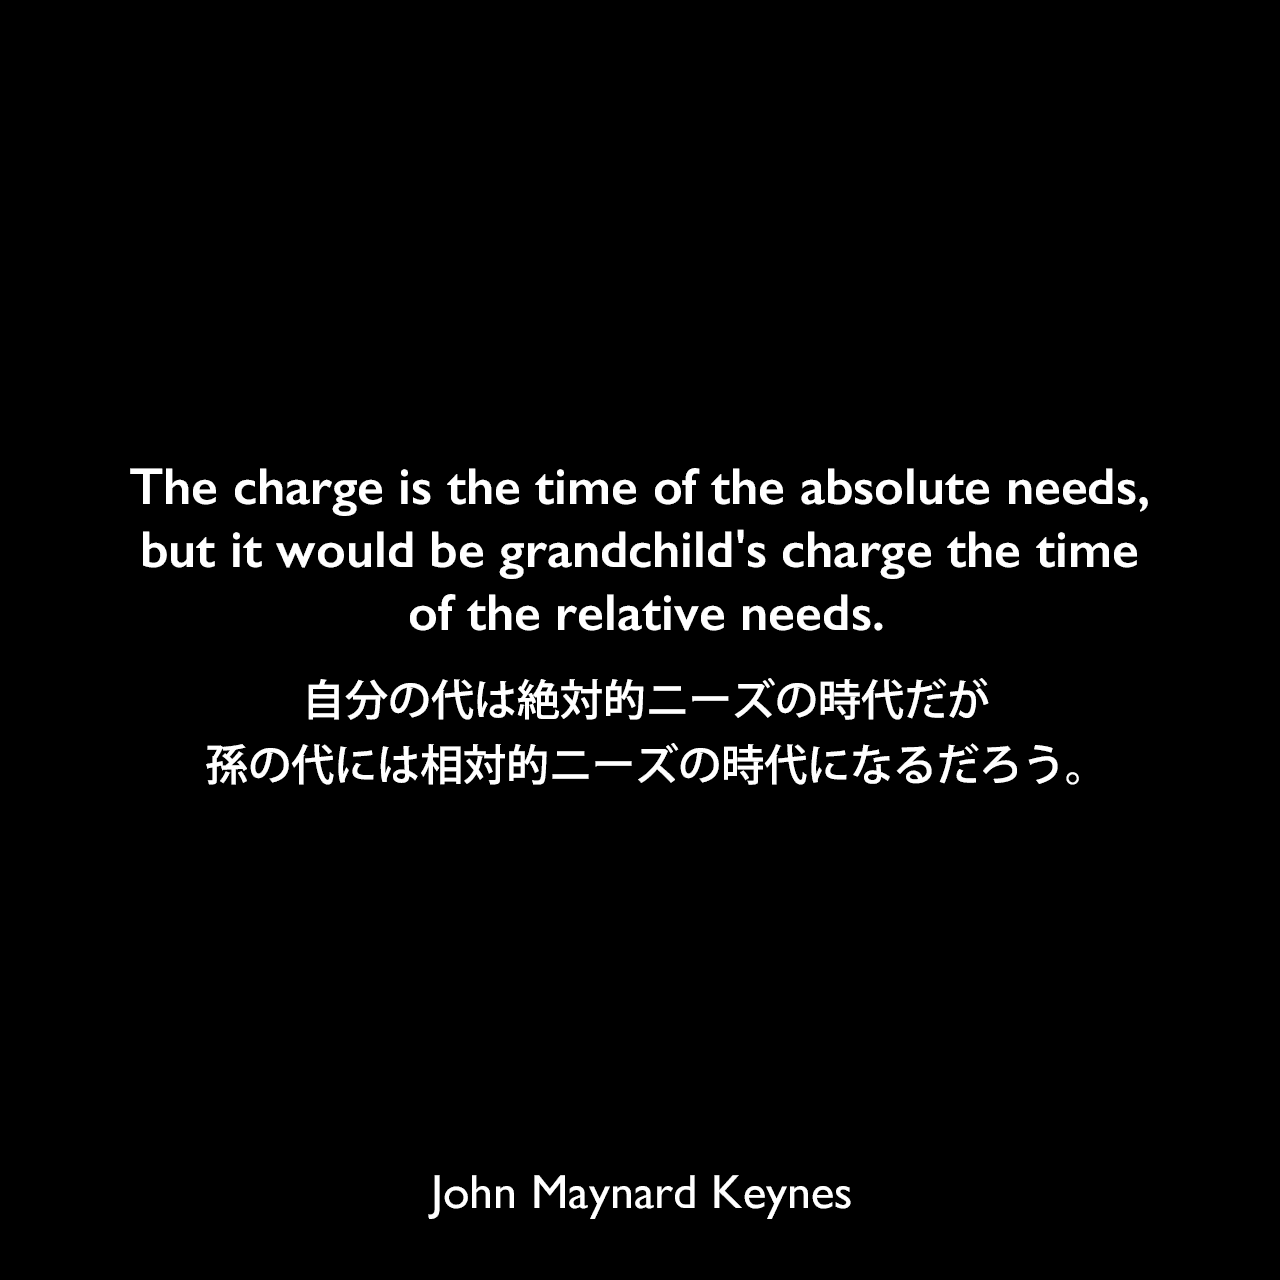 The charge is the time of the absolute needs, but it would be grandchild's charge the time of the relative needs.自分の代は絶対的ニーズの時代だが、孫の代には相対的ニーズの時代になるだろう。John Maynard Keynes